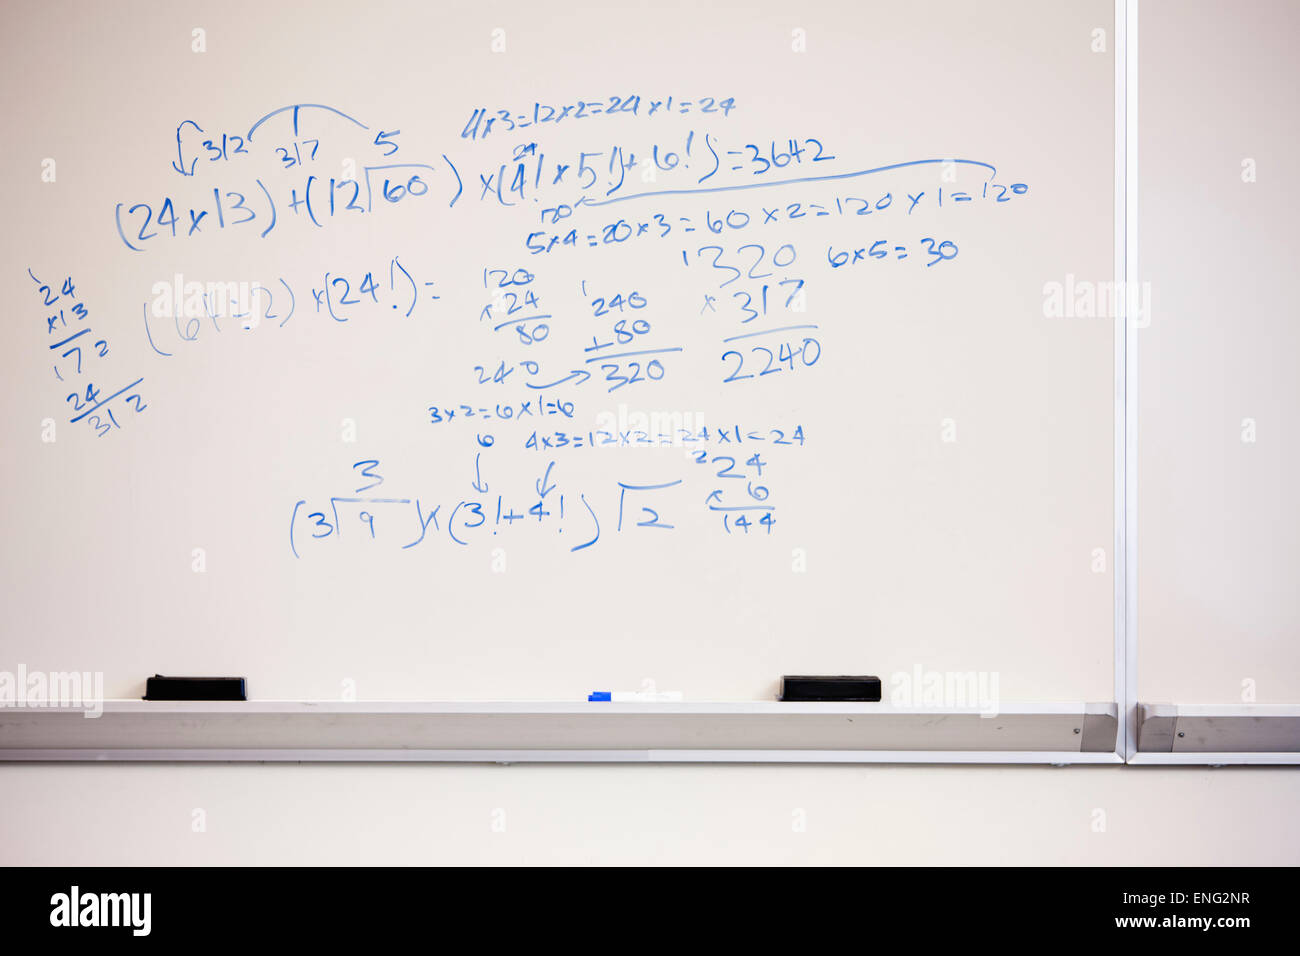 Math equations on whiteboard Stock Photo